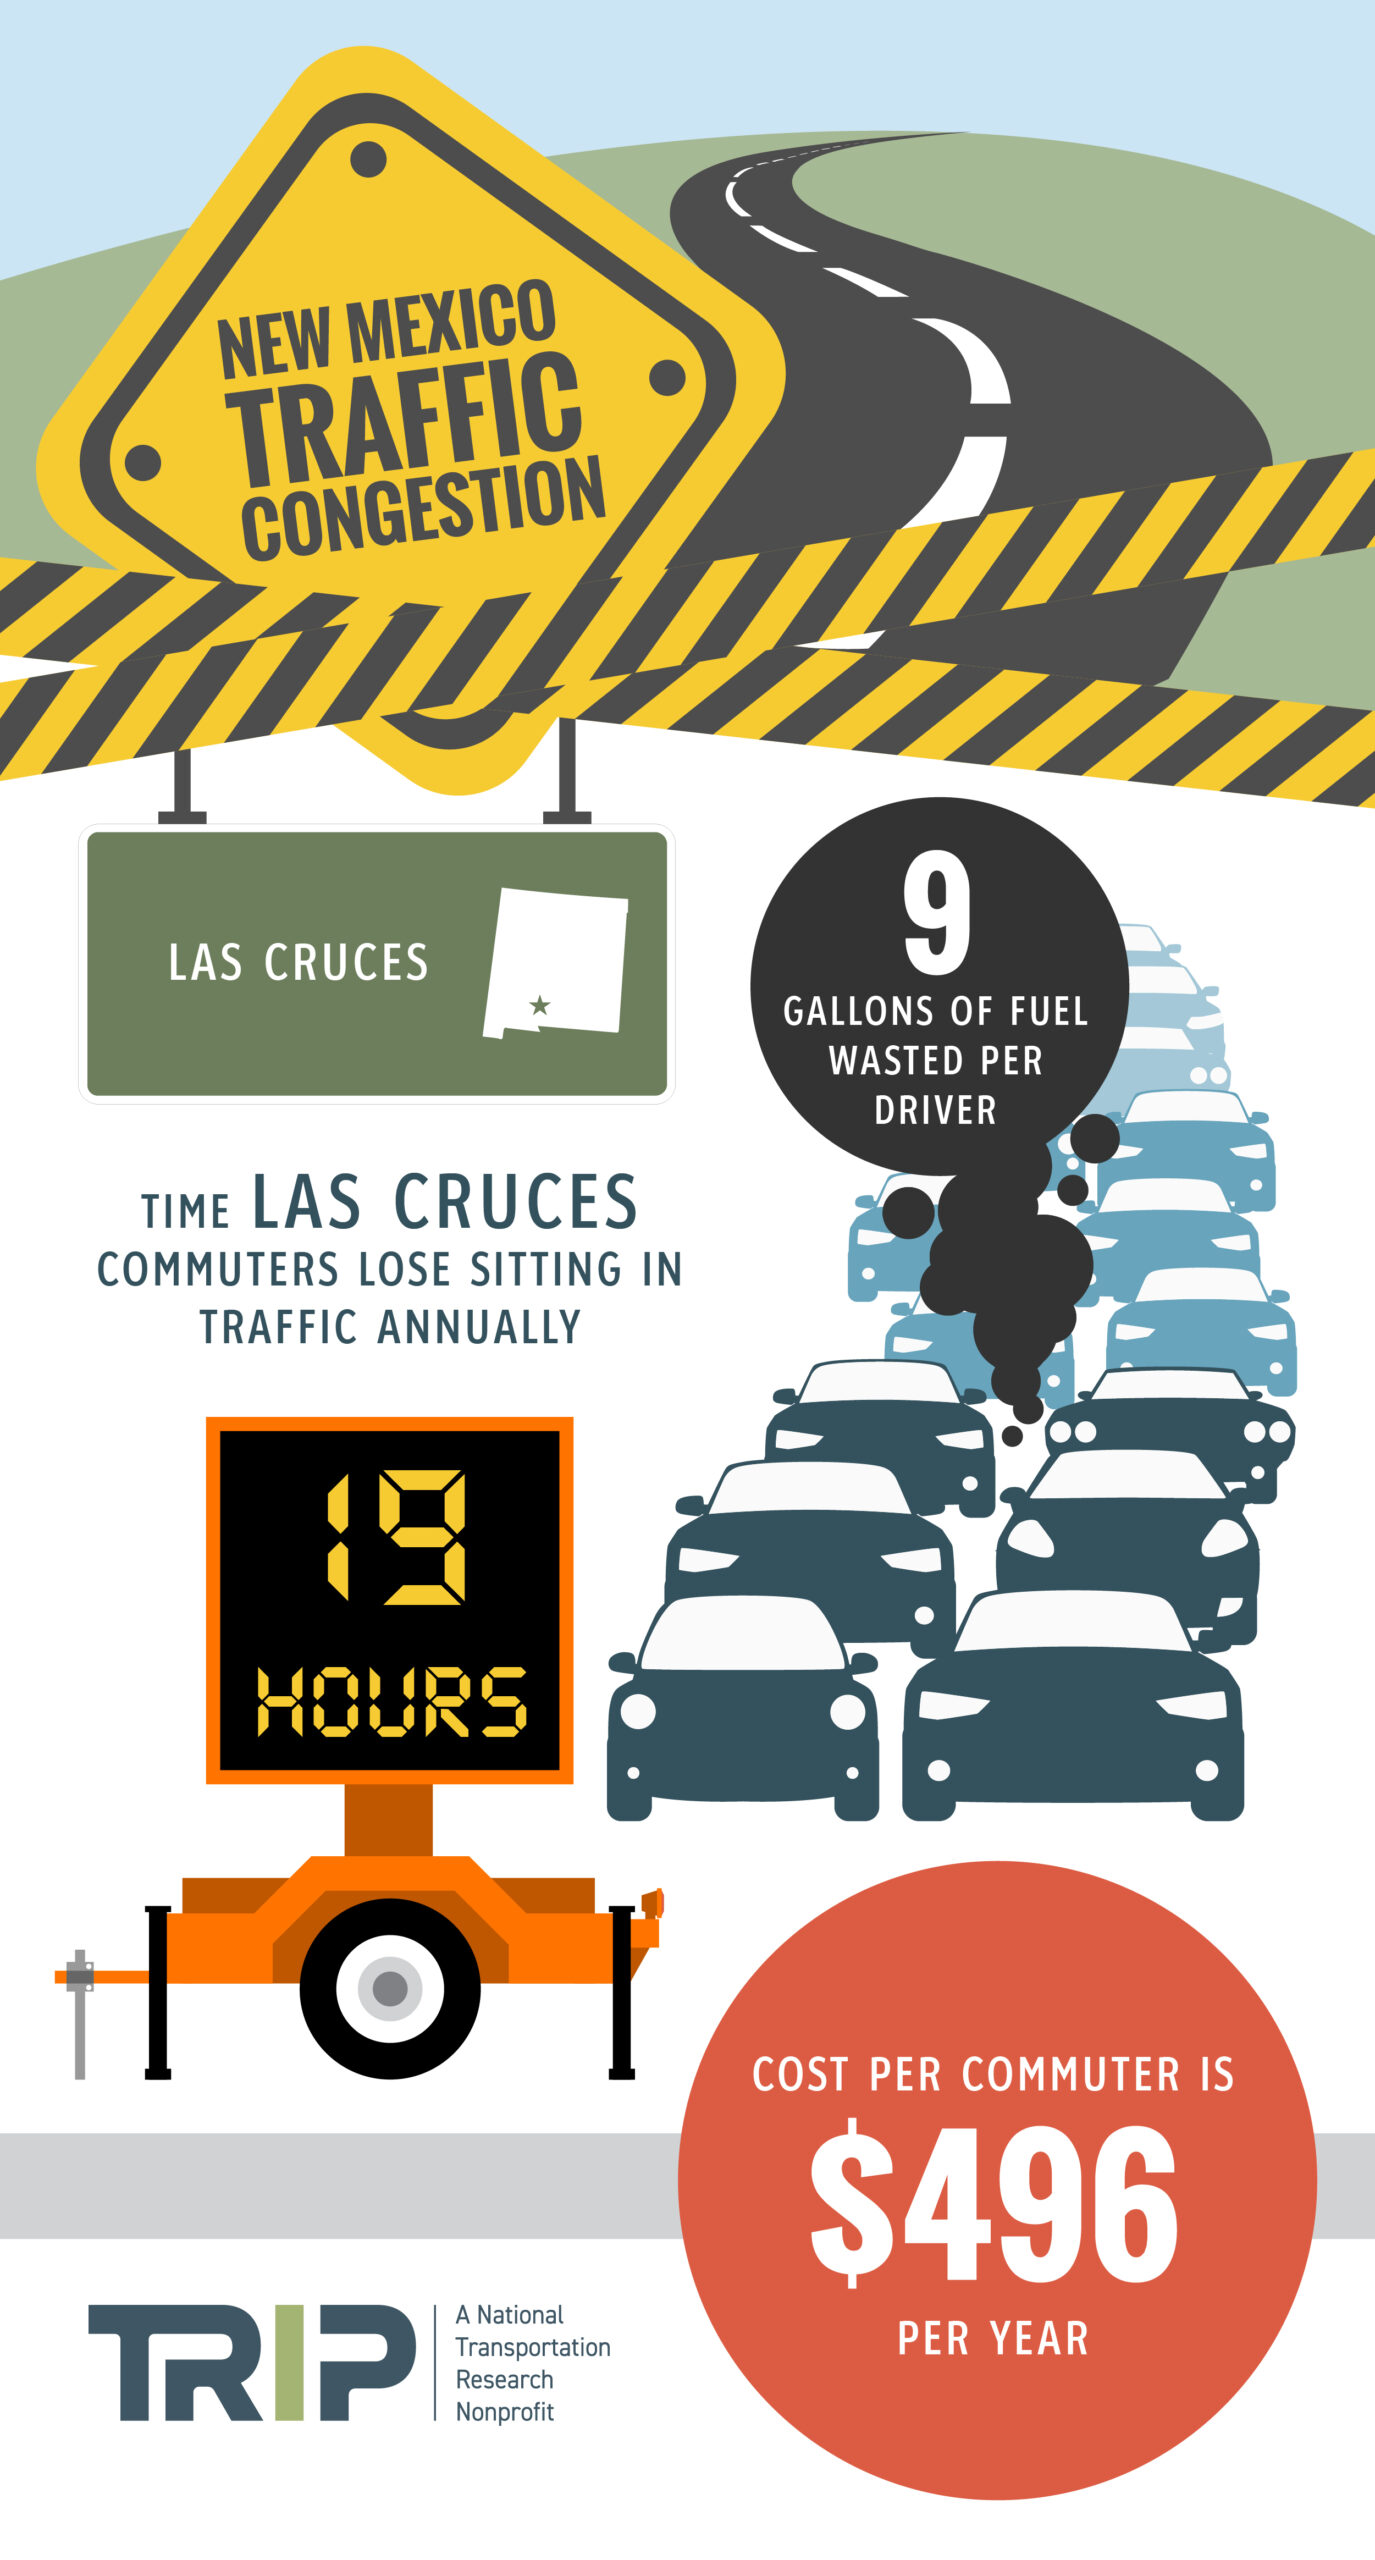 Las Cruces Traffic Congestion Infographic – February 2023